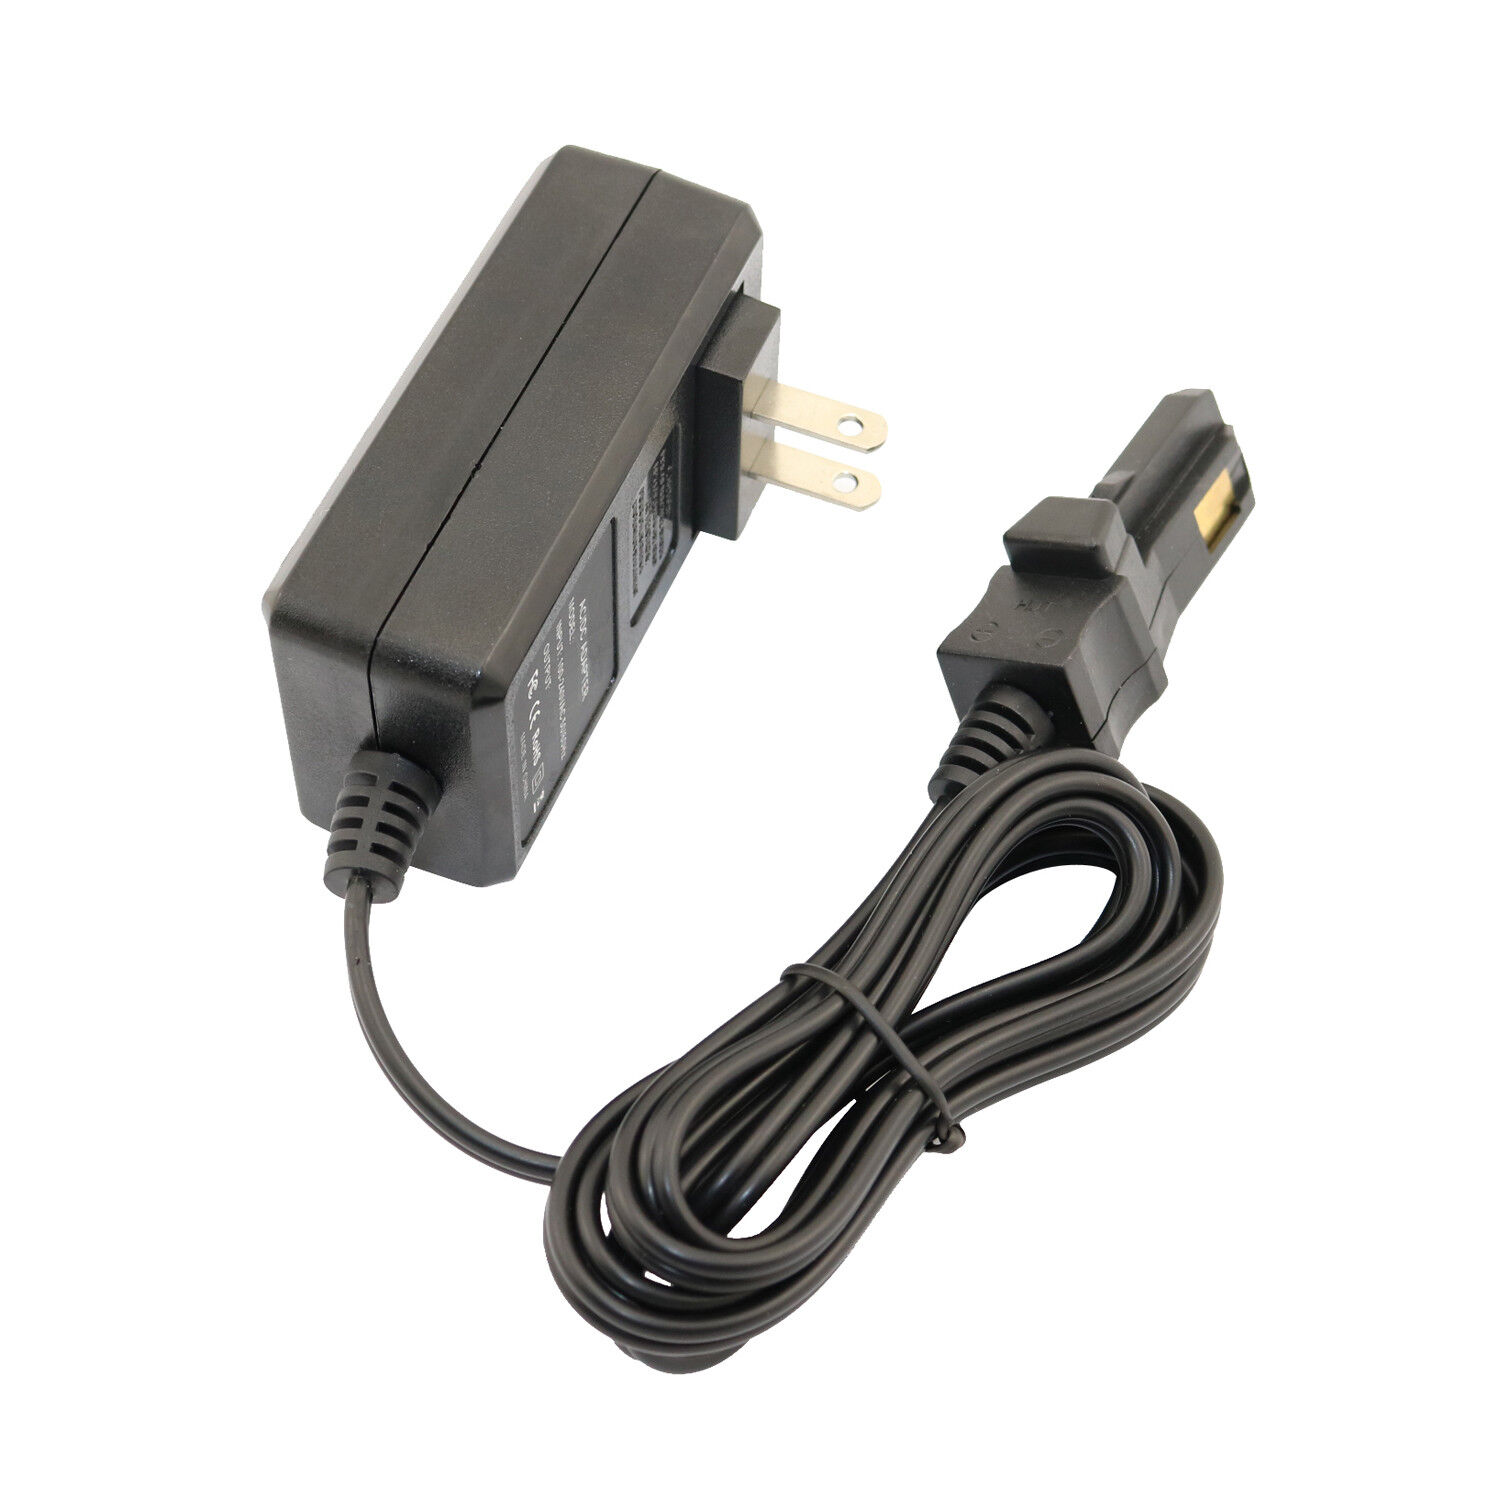 AC/DC Adapter Charger for Power Wheels Dune Racer W2602 Y6533 Extreme DMl91 AC/DC Adapter Charger for Power Wheels Dune